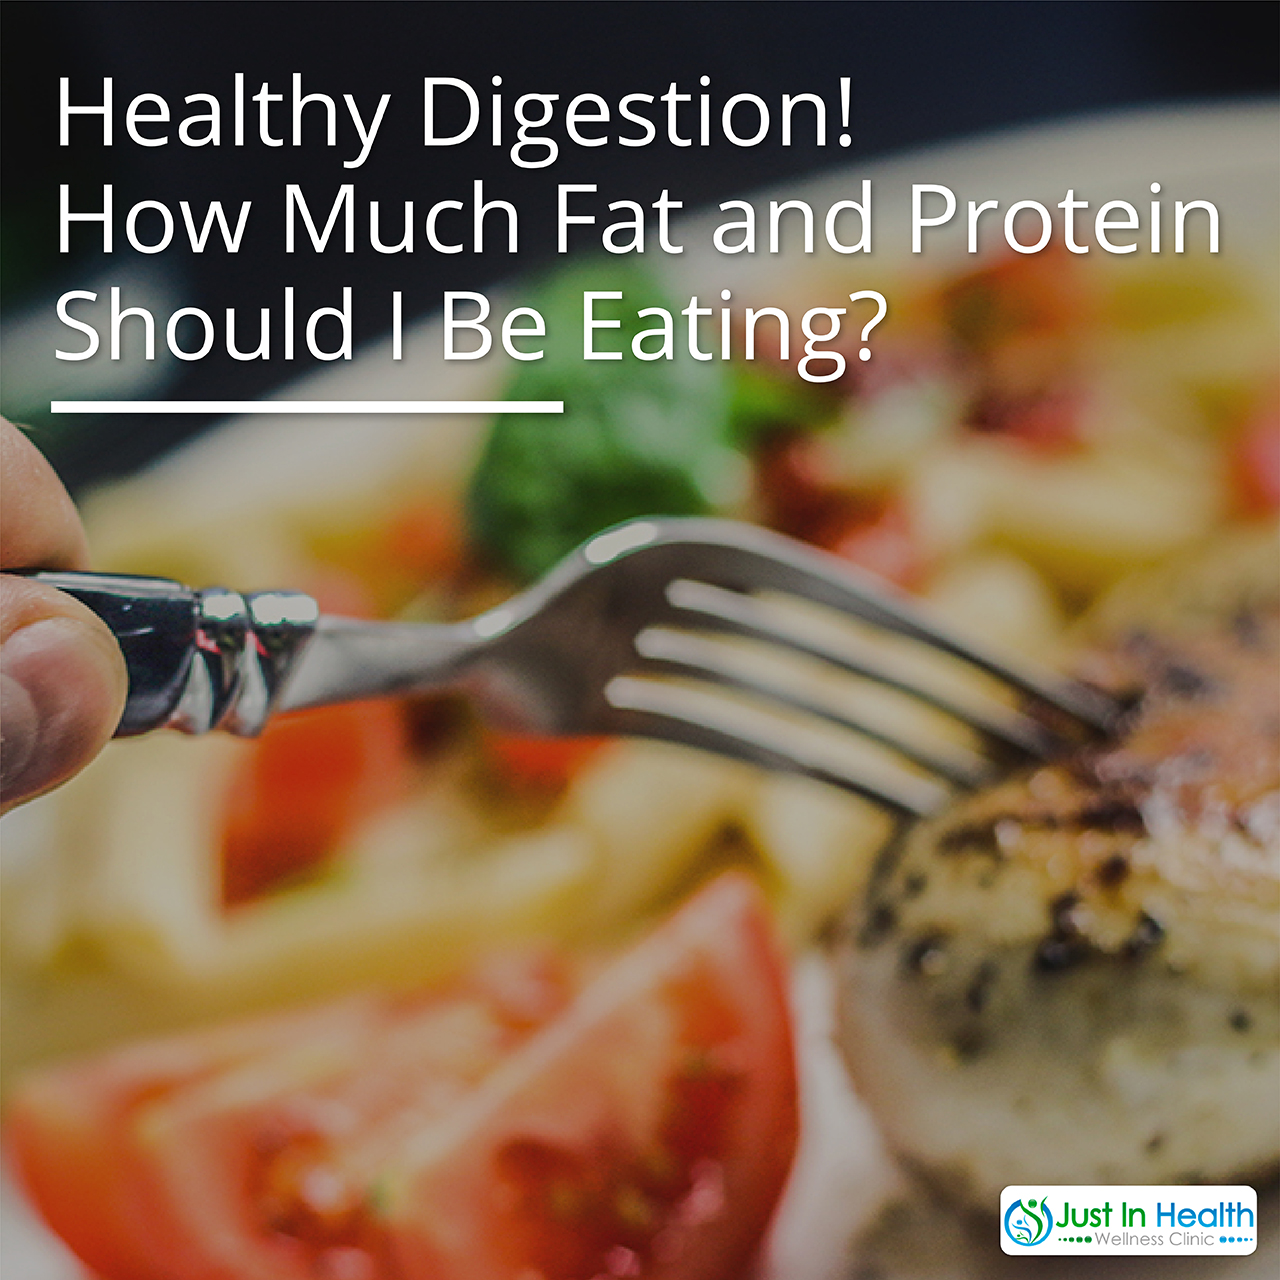 Healthy Digestion How Much Fat and Protein Should I Eat